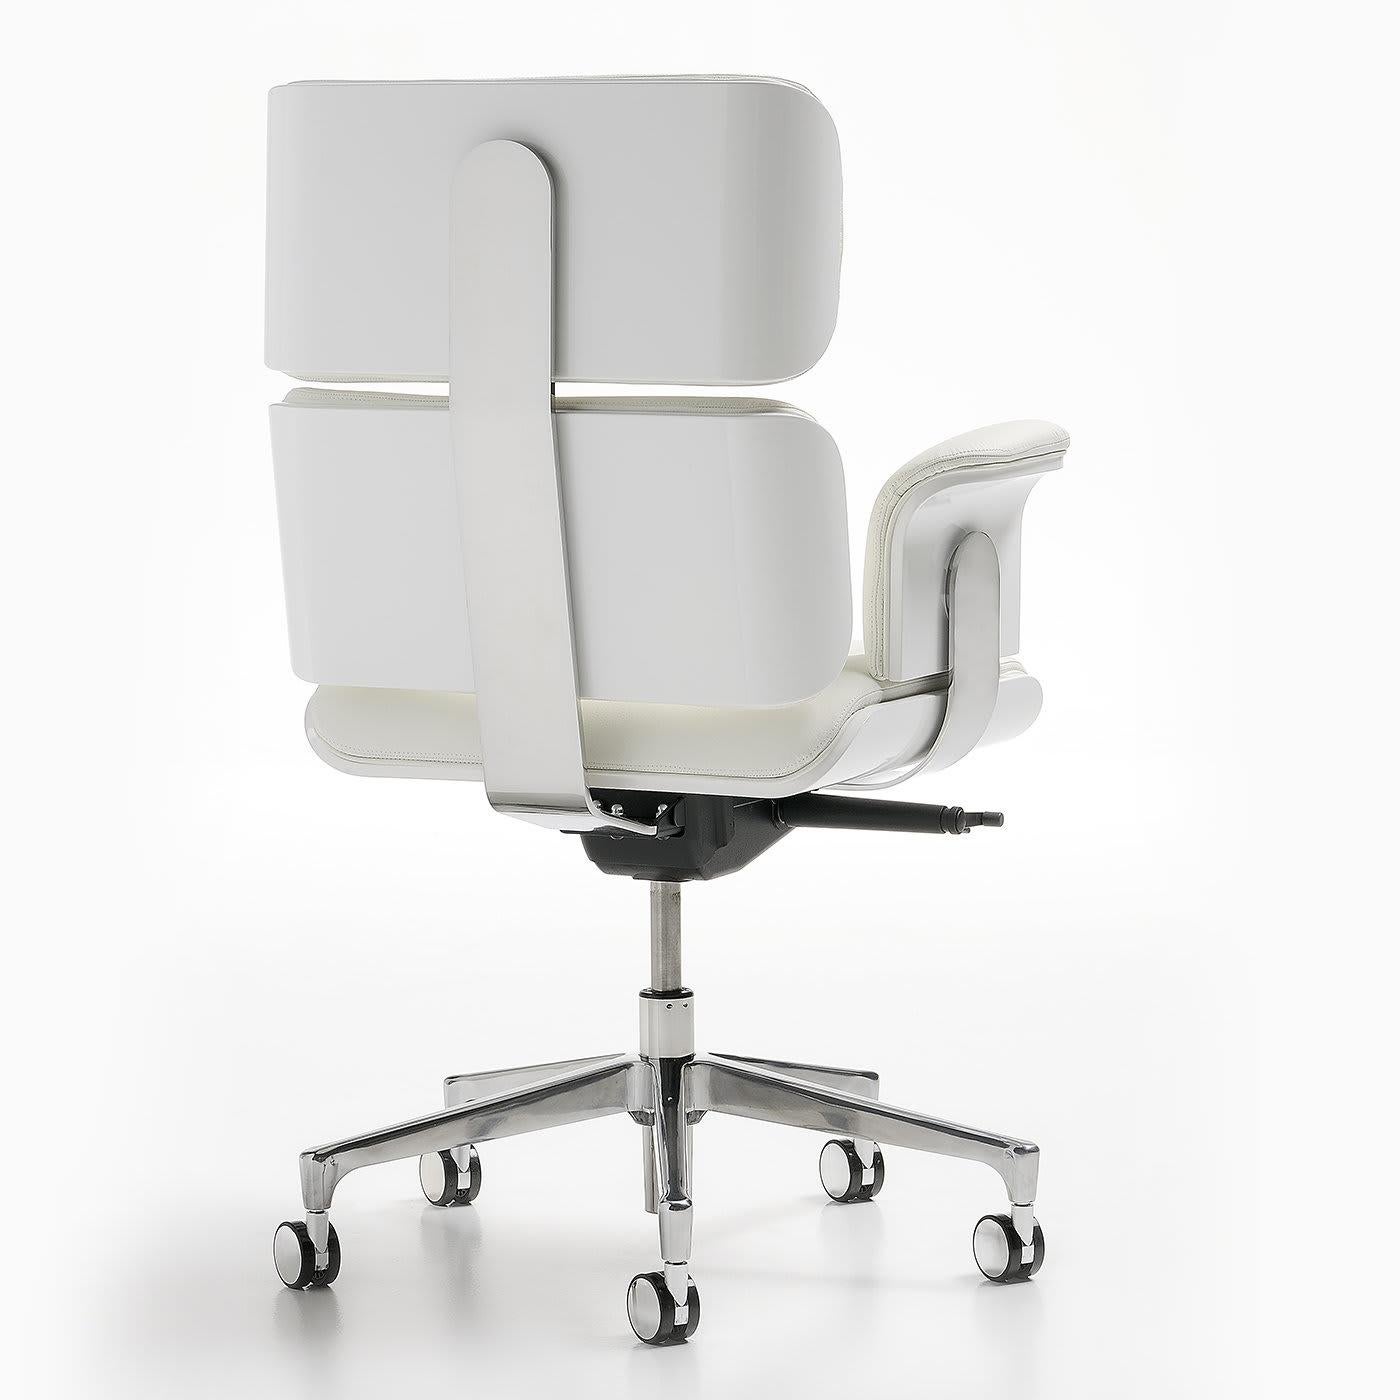 This luxury armchair is covered in white, genuine leather with Swarovski crystal buttons. Its seat height and tilt tension are fully adjustable, and the chair can be locked into five different tilt positions. It features a five-pronged,